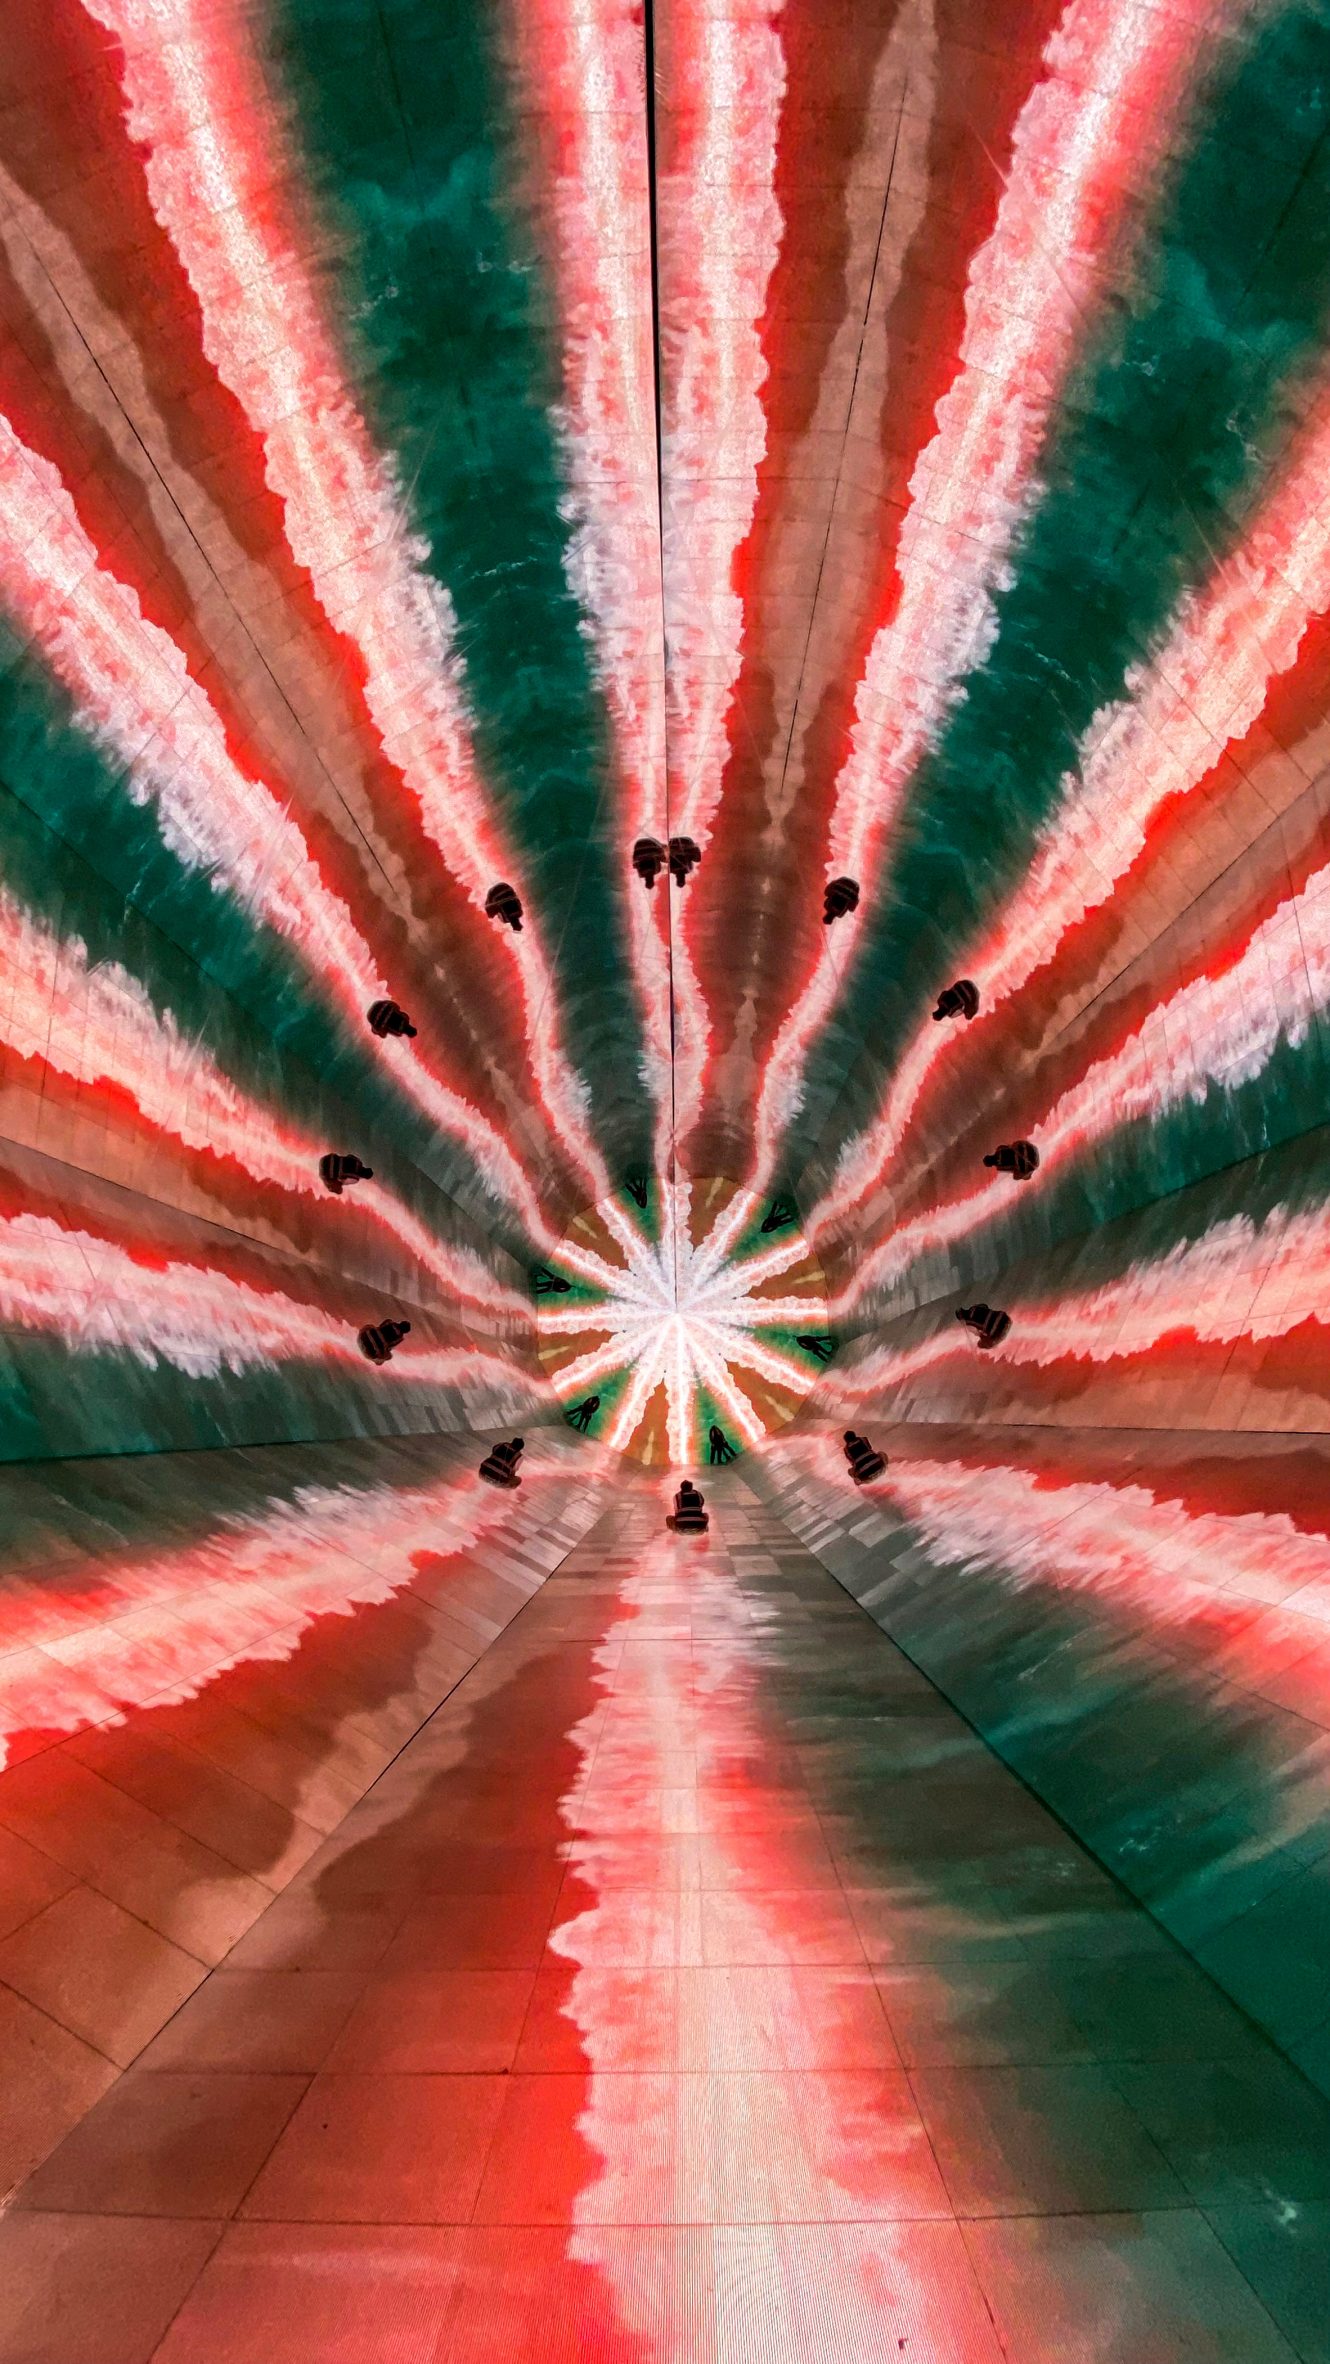 Abstract red and green imagery shows within a giant kaleidoscope